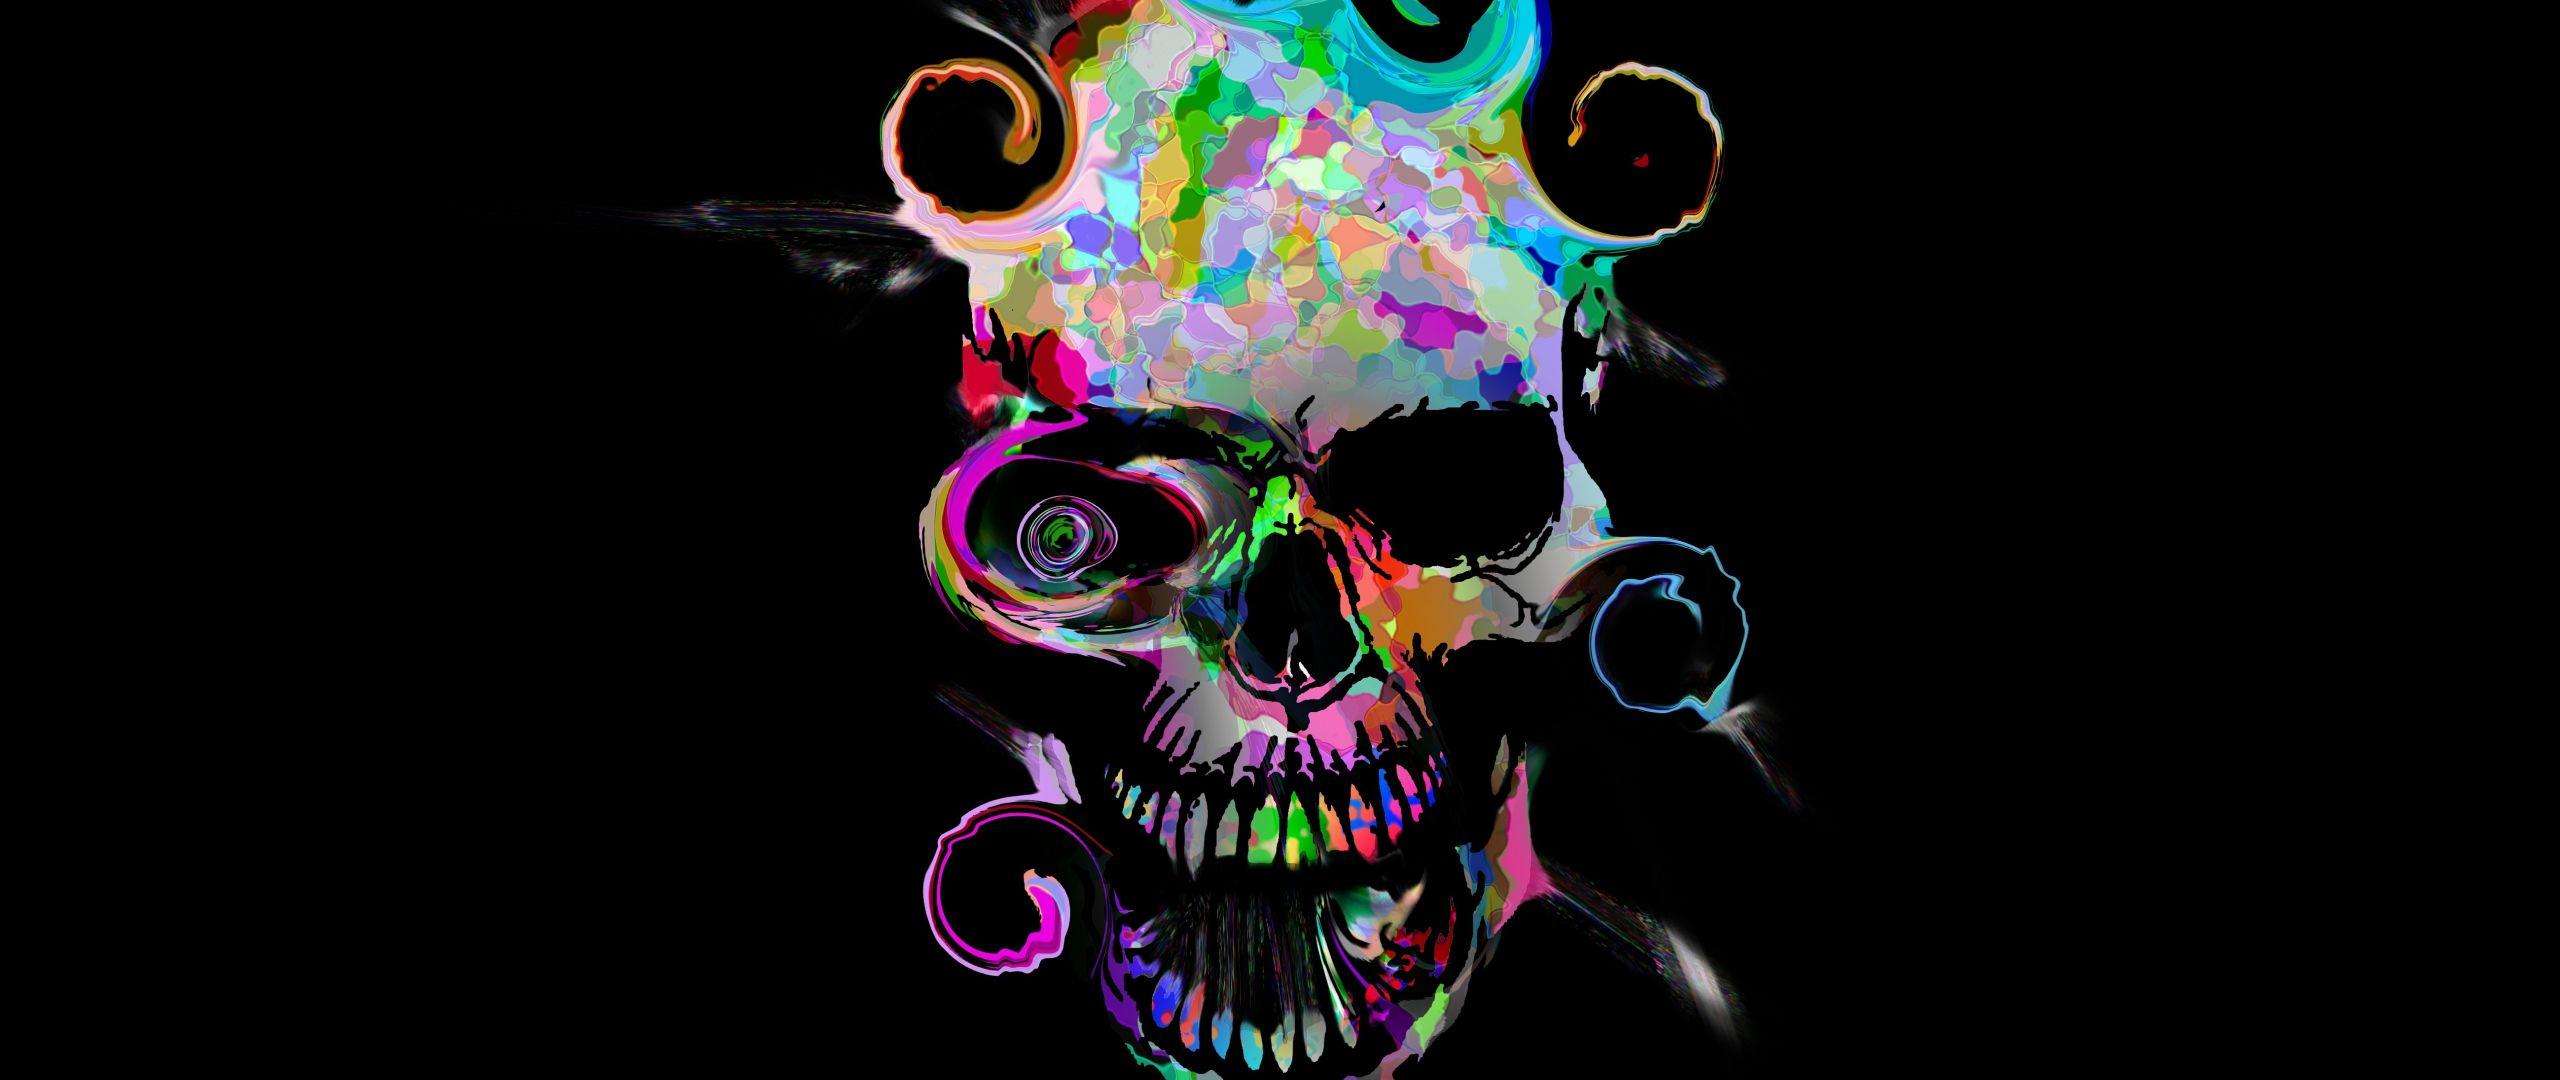 2560 X 1080 Skull Wallpapers - Top Free 2560 X 1080 Skull Backgrounds